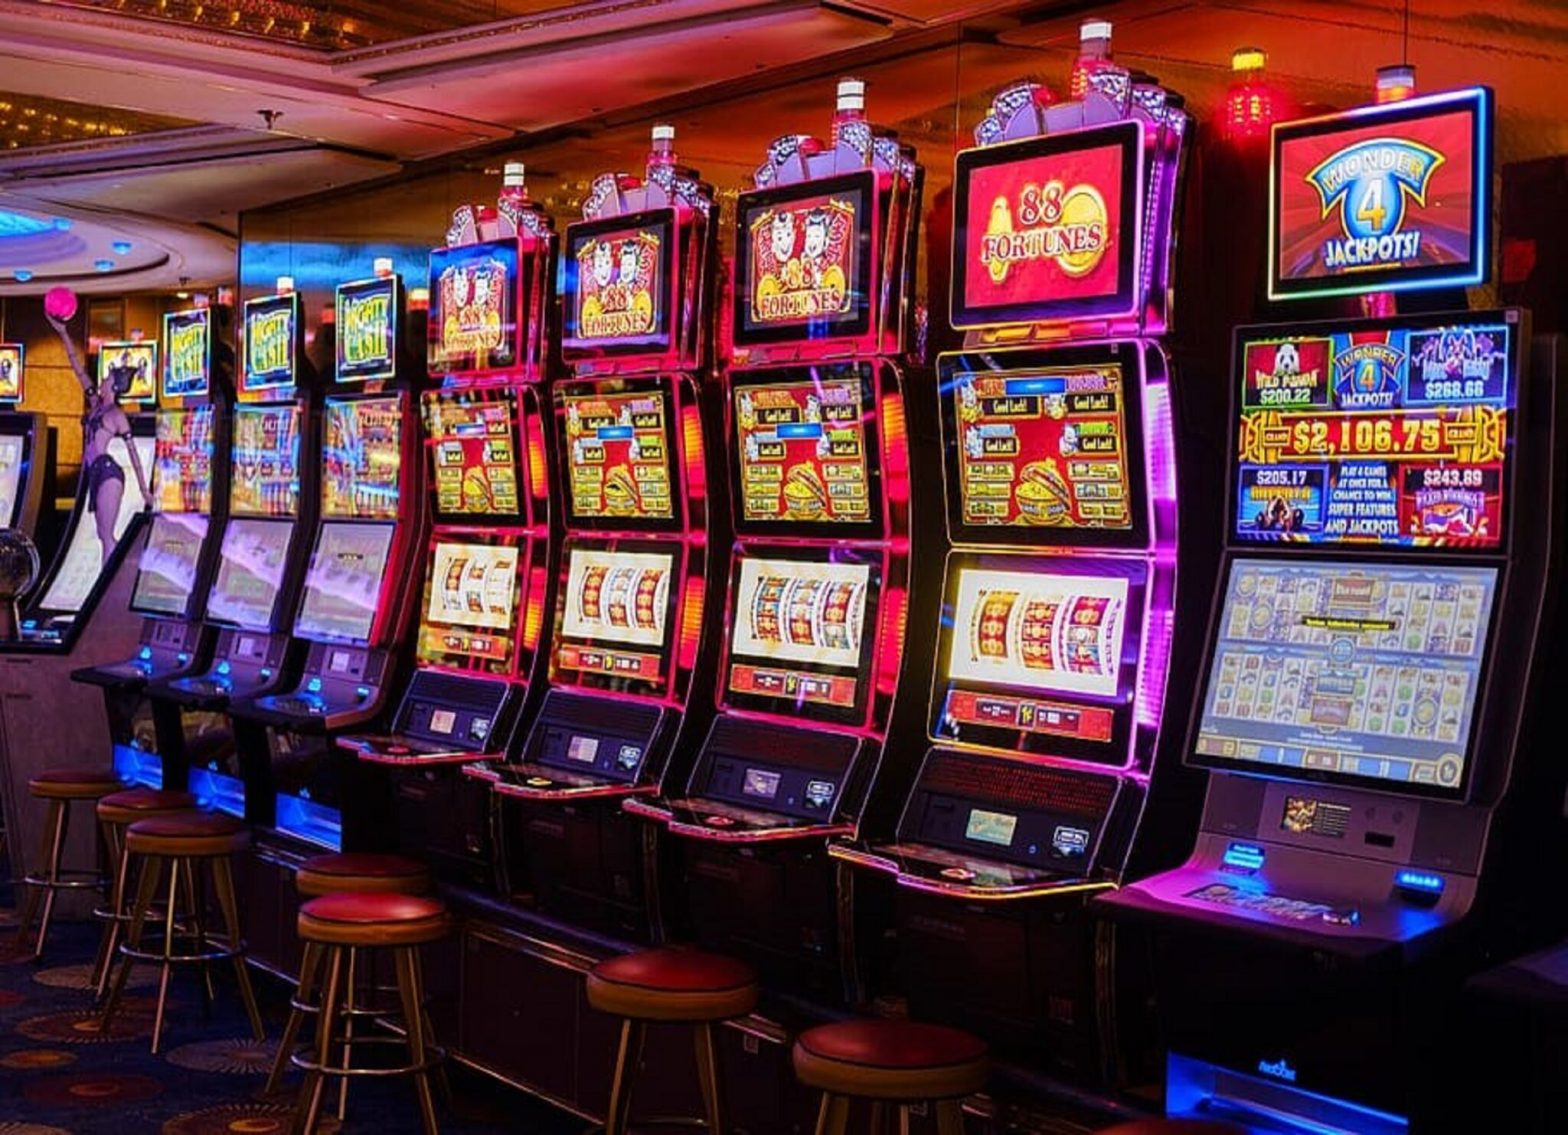 Are there any secrets of slot machines?